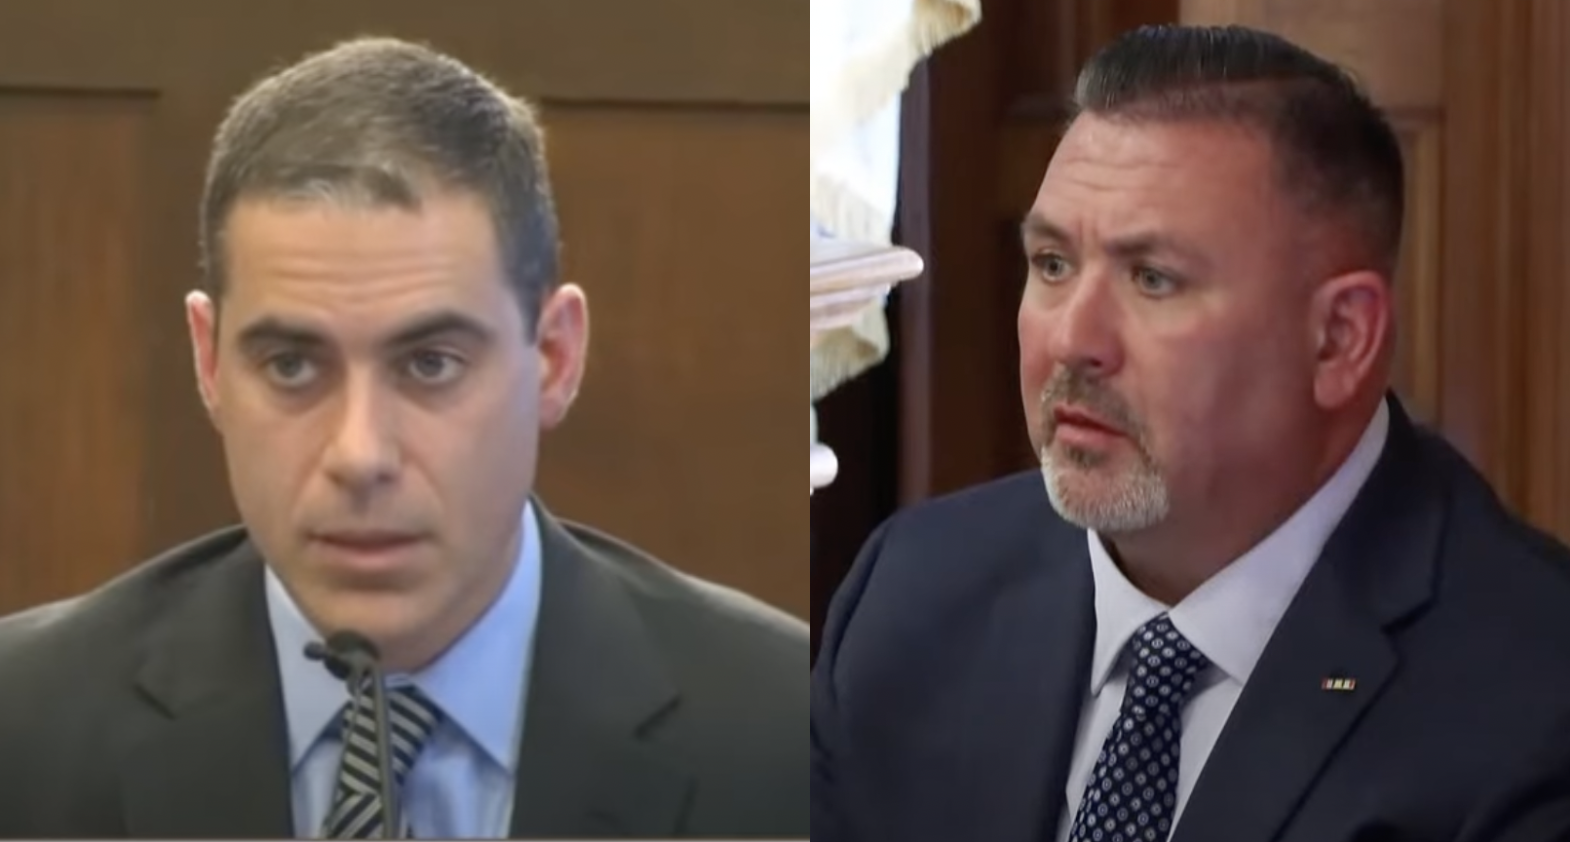 Canton Coverup Part 360: Brian Higgins' "Best Friend" ATF Forensic Expert Matt Kelsch Testified In Aaron Hernandez Trial About Destroying SIM Cards To Hide Deleted Messages  - TB Daily News